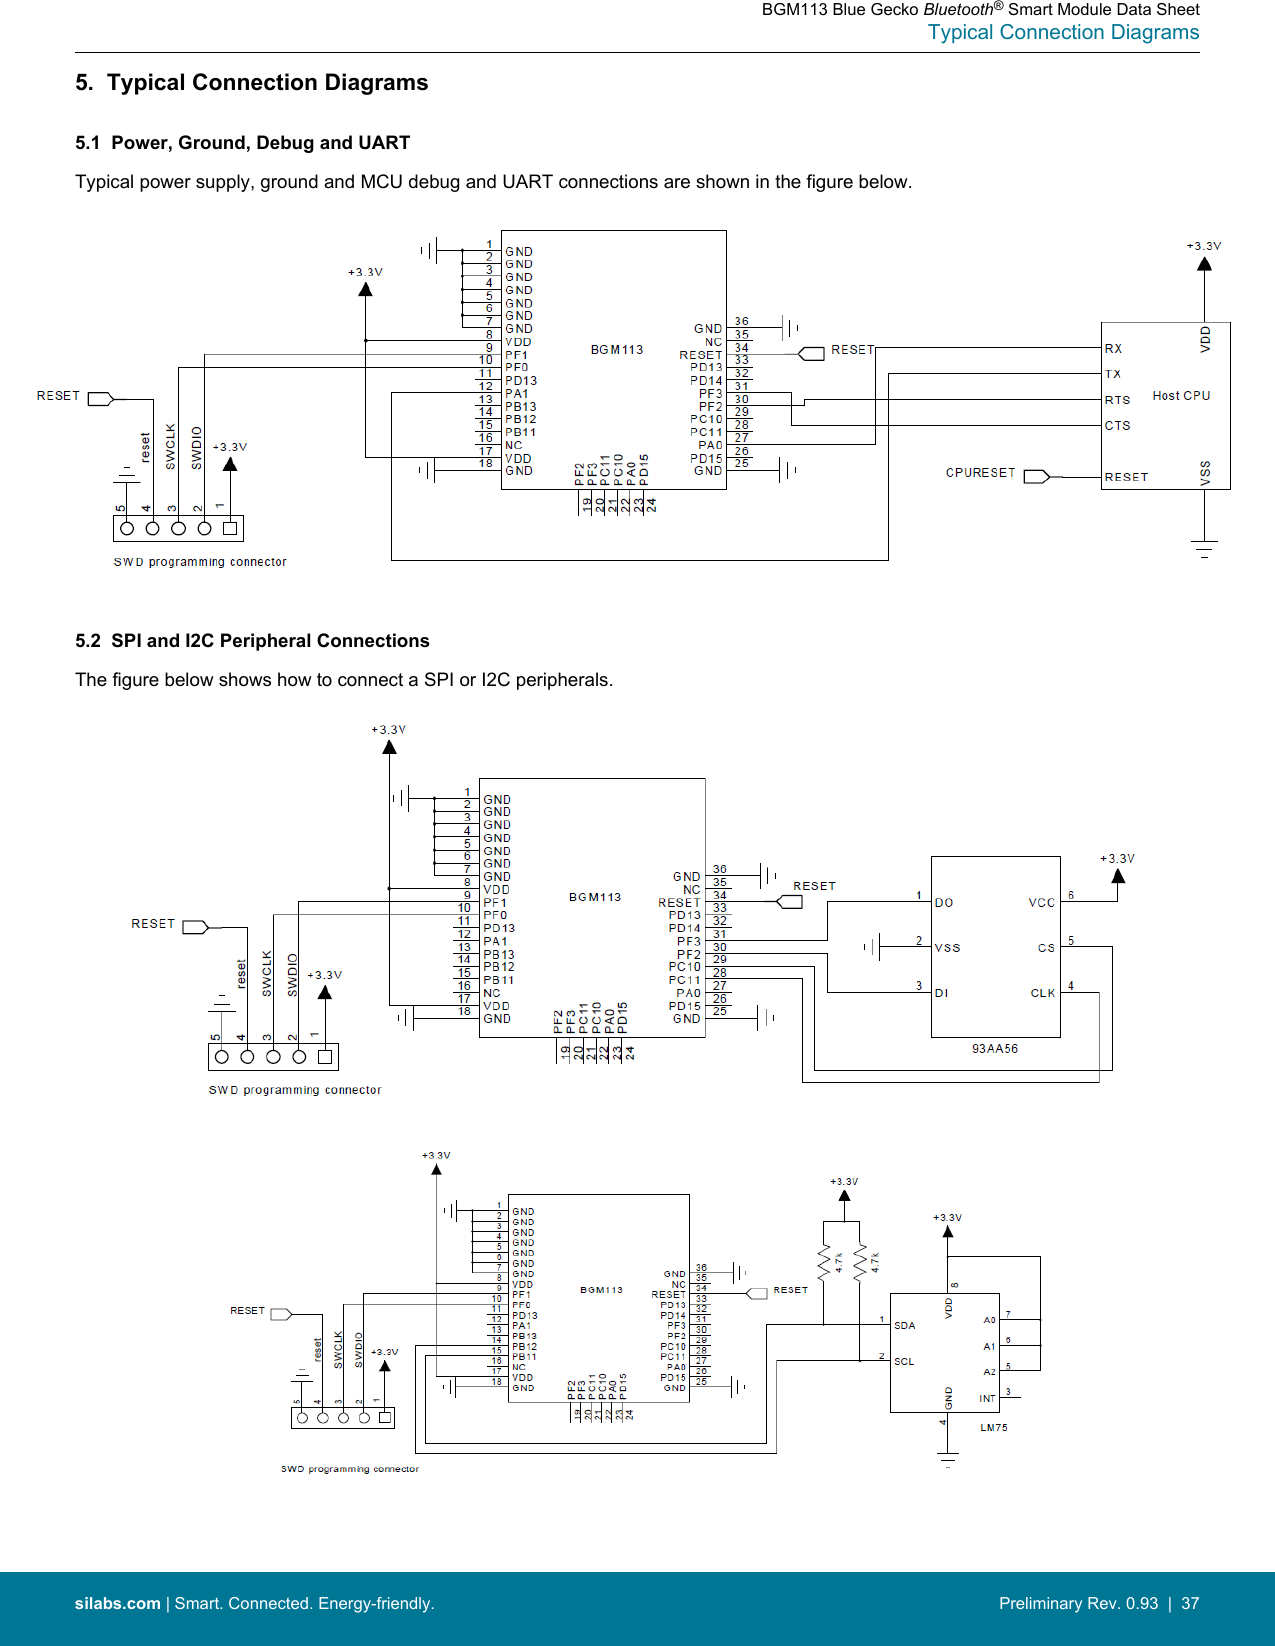 5.  Typical Connection Diagrams5.1  Power, Ground, Debug and UARTTypical power supply, ground and MCU debug and UART connections are shown in the figure below.5.2  SPI and I2C Peripheral ConnectionsThe figure below shows how to connect a SPI or I2C peripherals.BGM113 Blue Gecko Bluetooth® Smart Module Data SheetTypical Connection Diagramssilabs.com | Smart. Connected. Energy-friendly. Preliminary Rev. 0.93  |  37